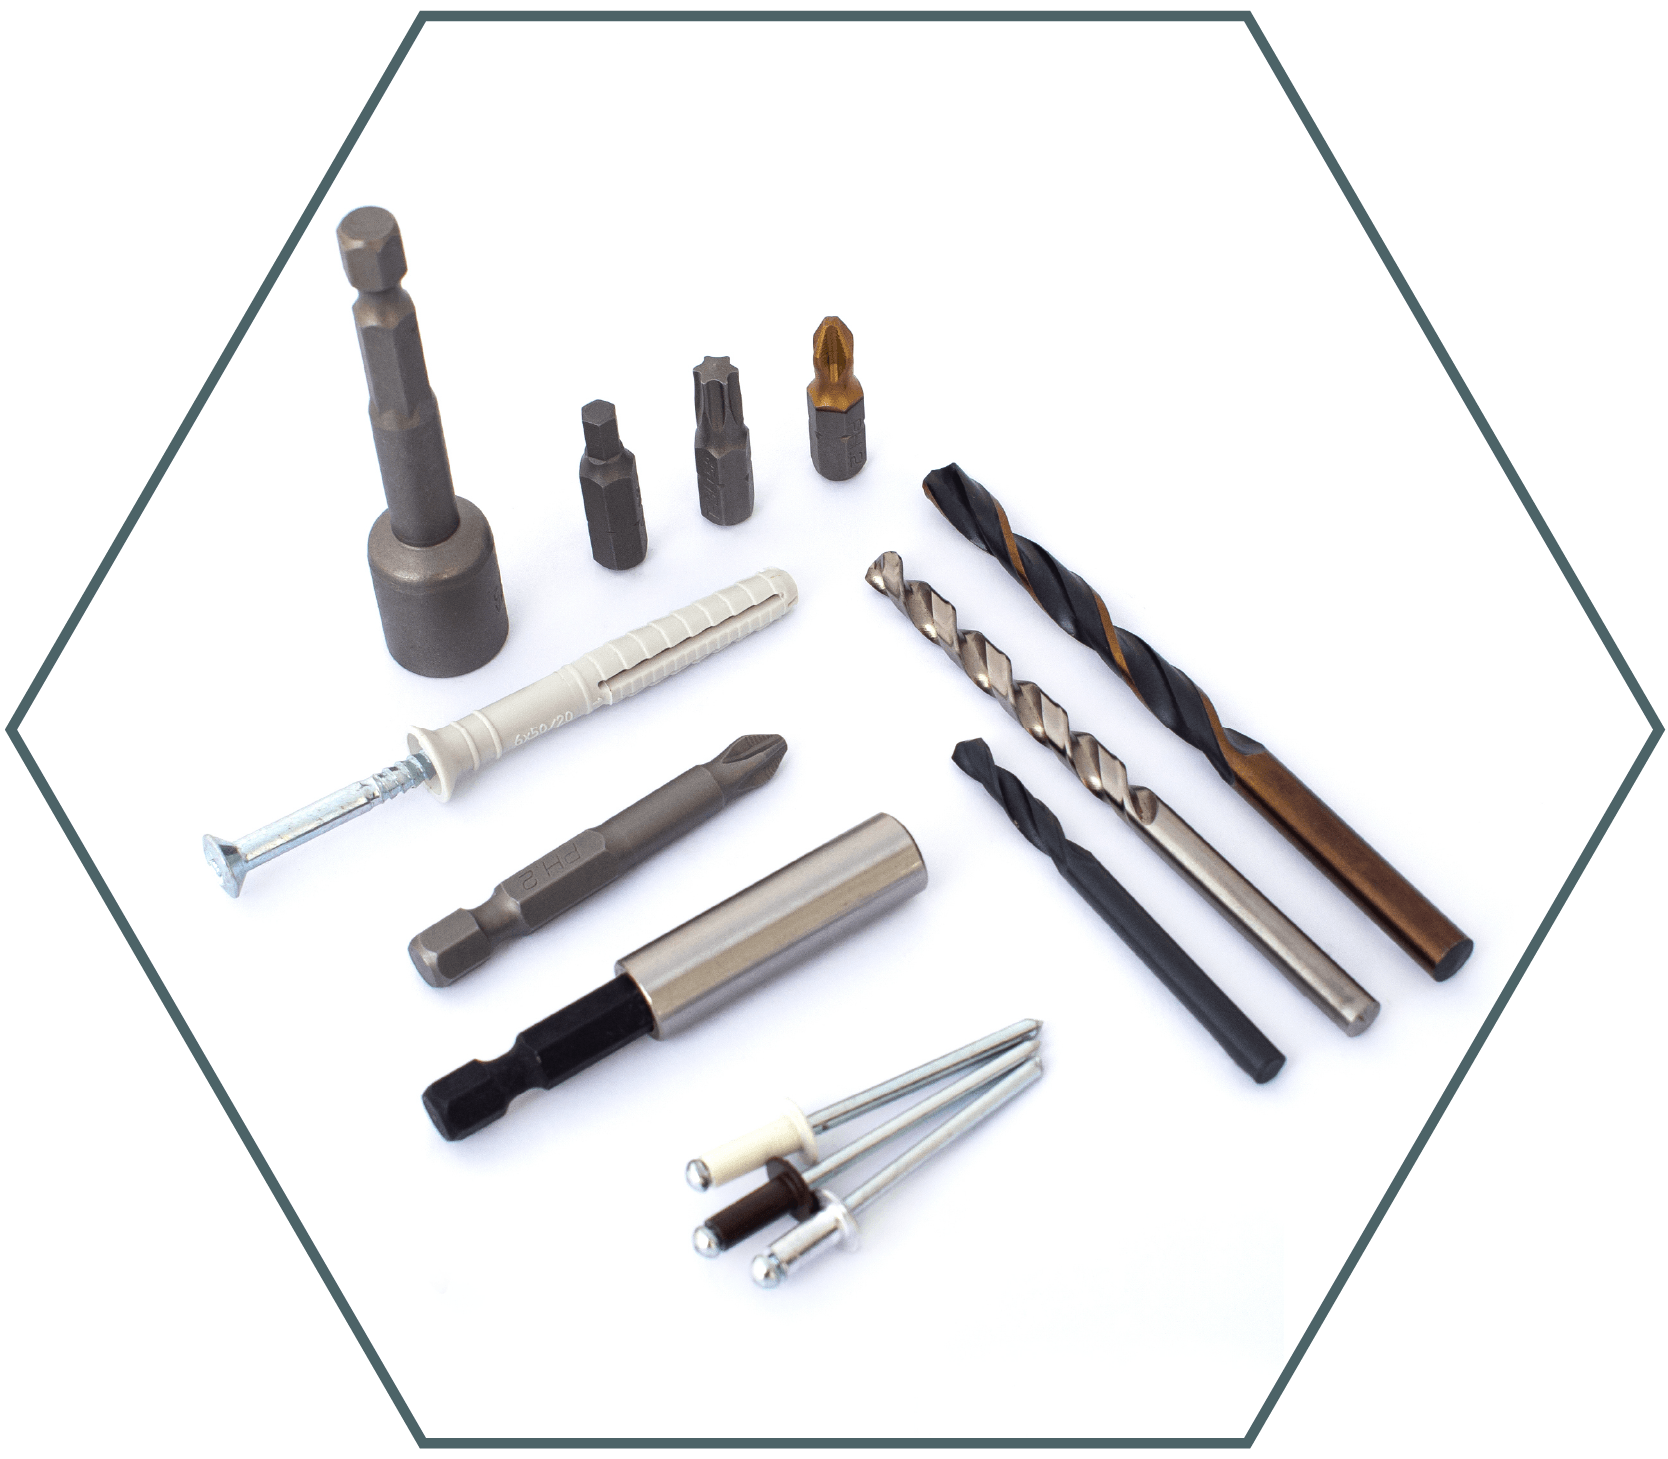 Fasteners specialists - Other products